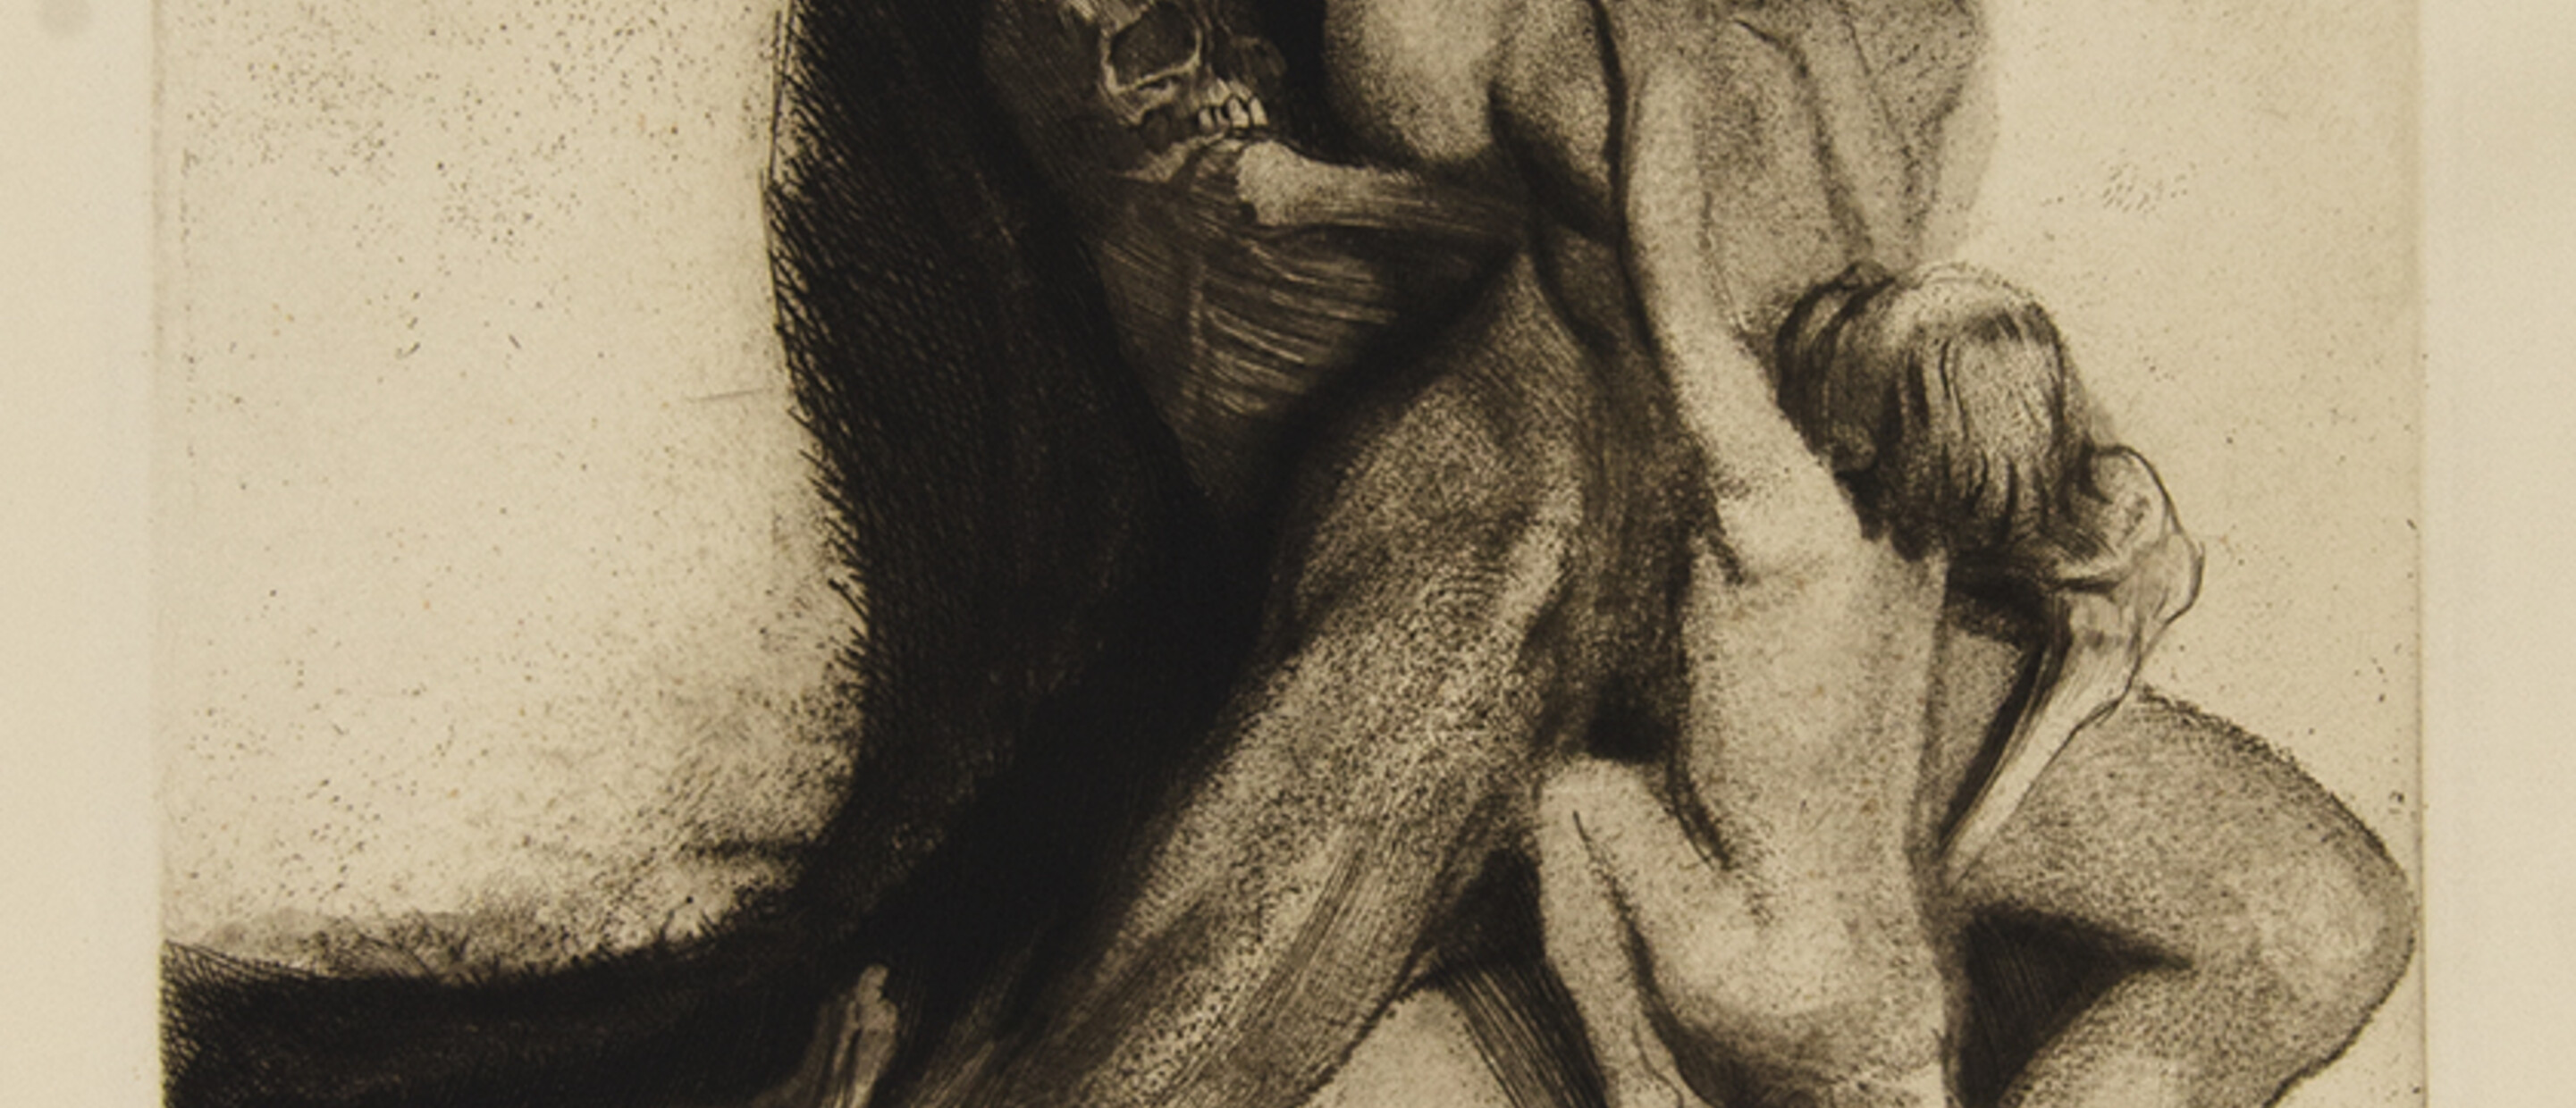 Käthe Kollwitz, Tod and Frau (Death Seizing a Woman), 1910, 17 1/2 x 17 in. Etching on paper. Pomona College Collection. Gift of the Culley Collection 